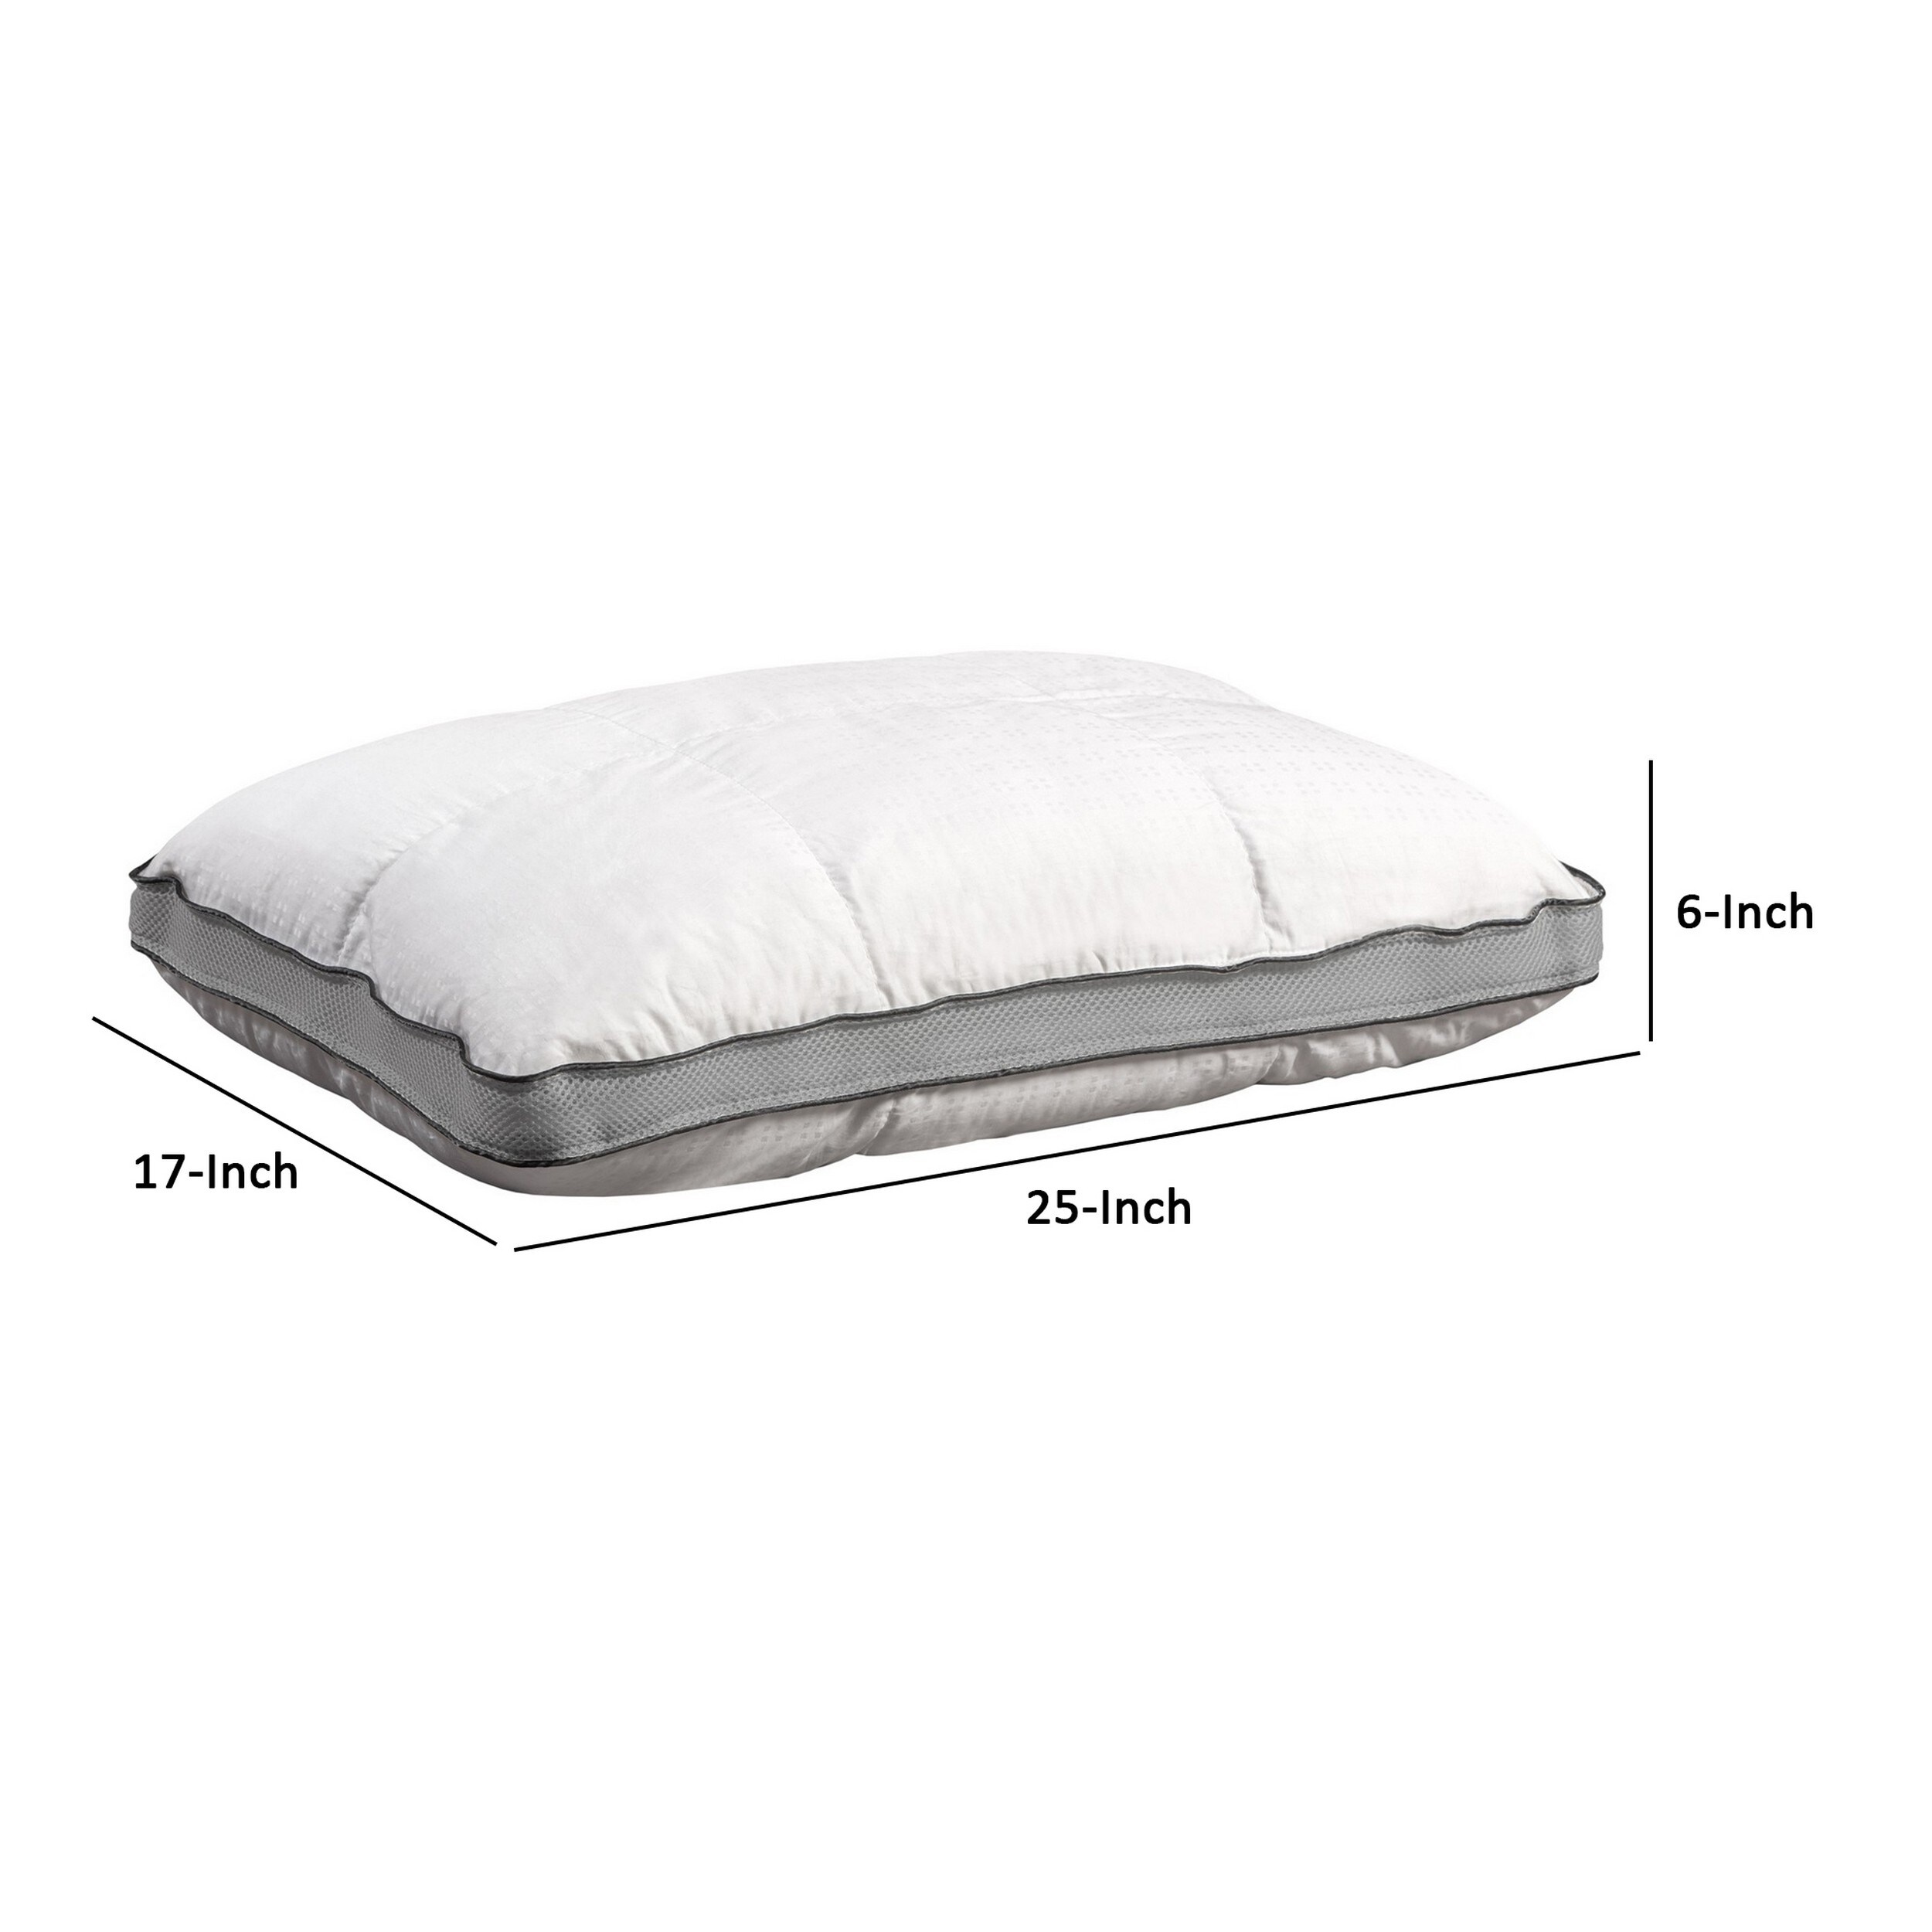 17 x 25 Ultra Soft Memory Foam Pillow with 3D Spacer Outline, White, Gray - White, Gray - image 5 of 5